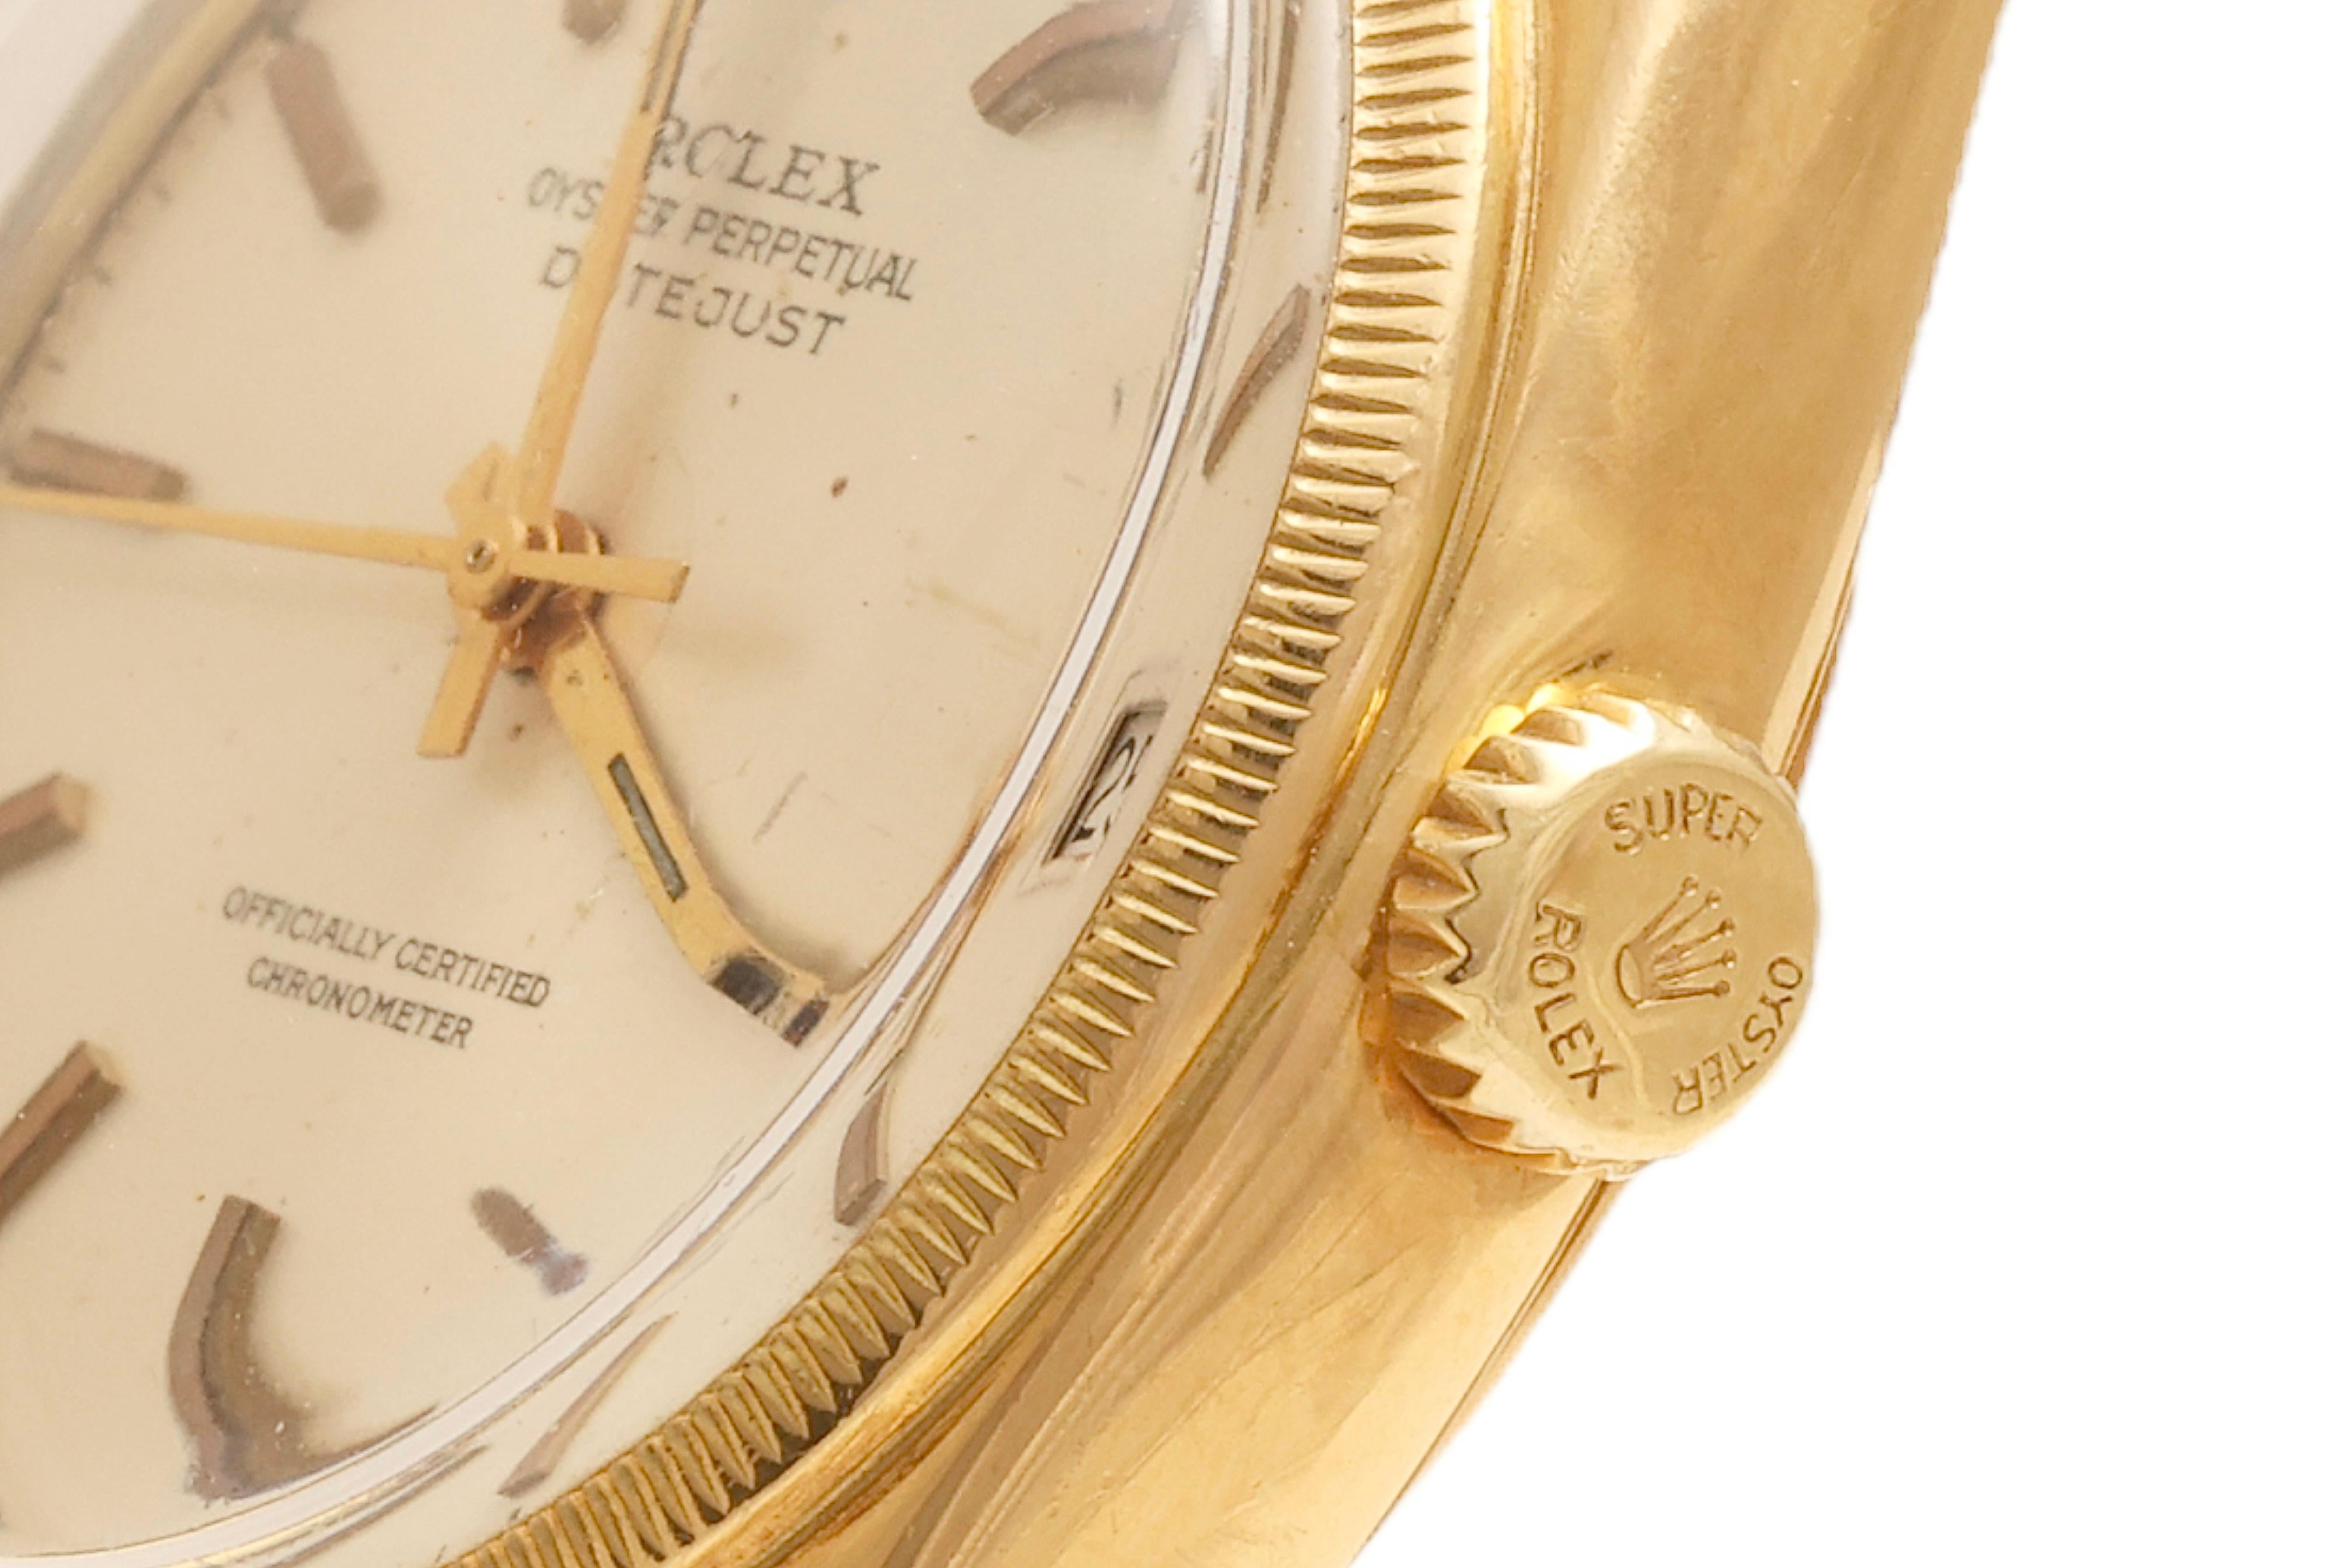 18 Kt full Gold Rolex Ref. 6031 Big Bubble Back Ovettone, First Datejust Automatic Wrist Watch

Movement : Mechanical with Automatic Winding

Case & Strap : 18 Kt Yellow Gold 

Rolex Ref. 6030 / 6031 Big Bubble Back Ovettone

Extremely rare model in